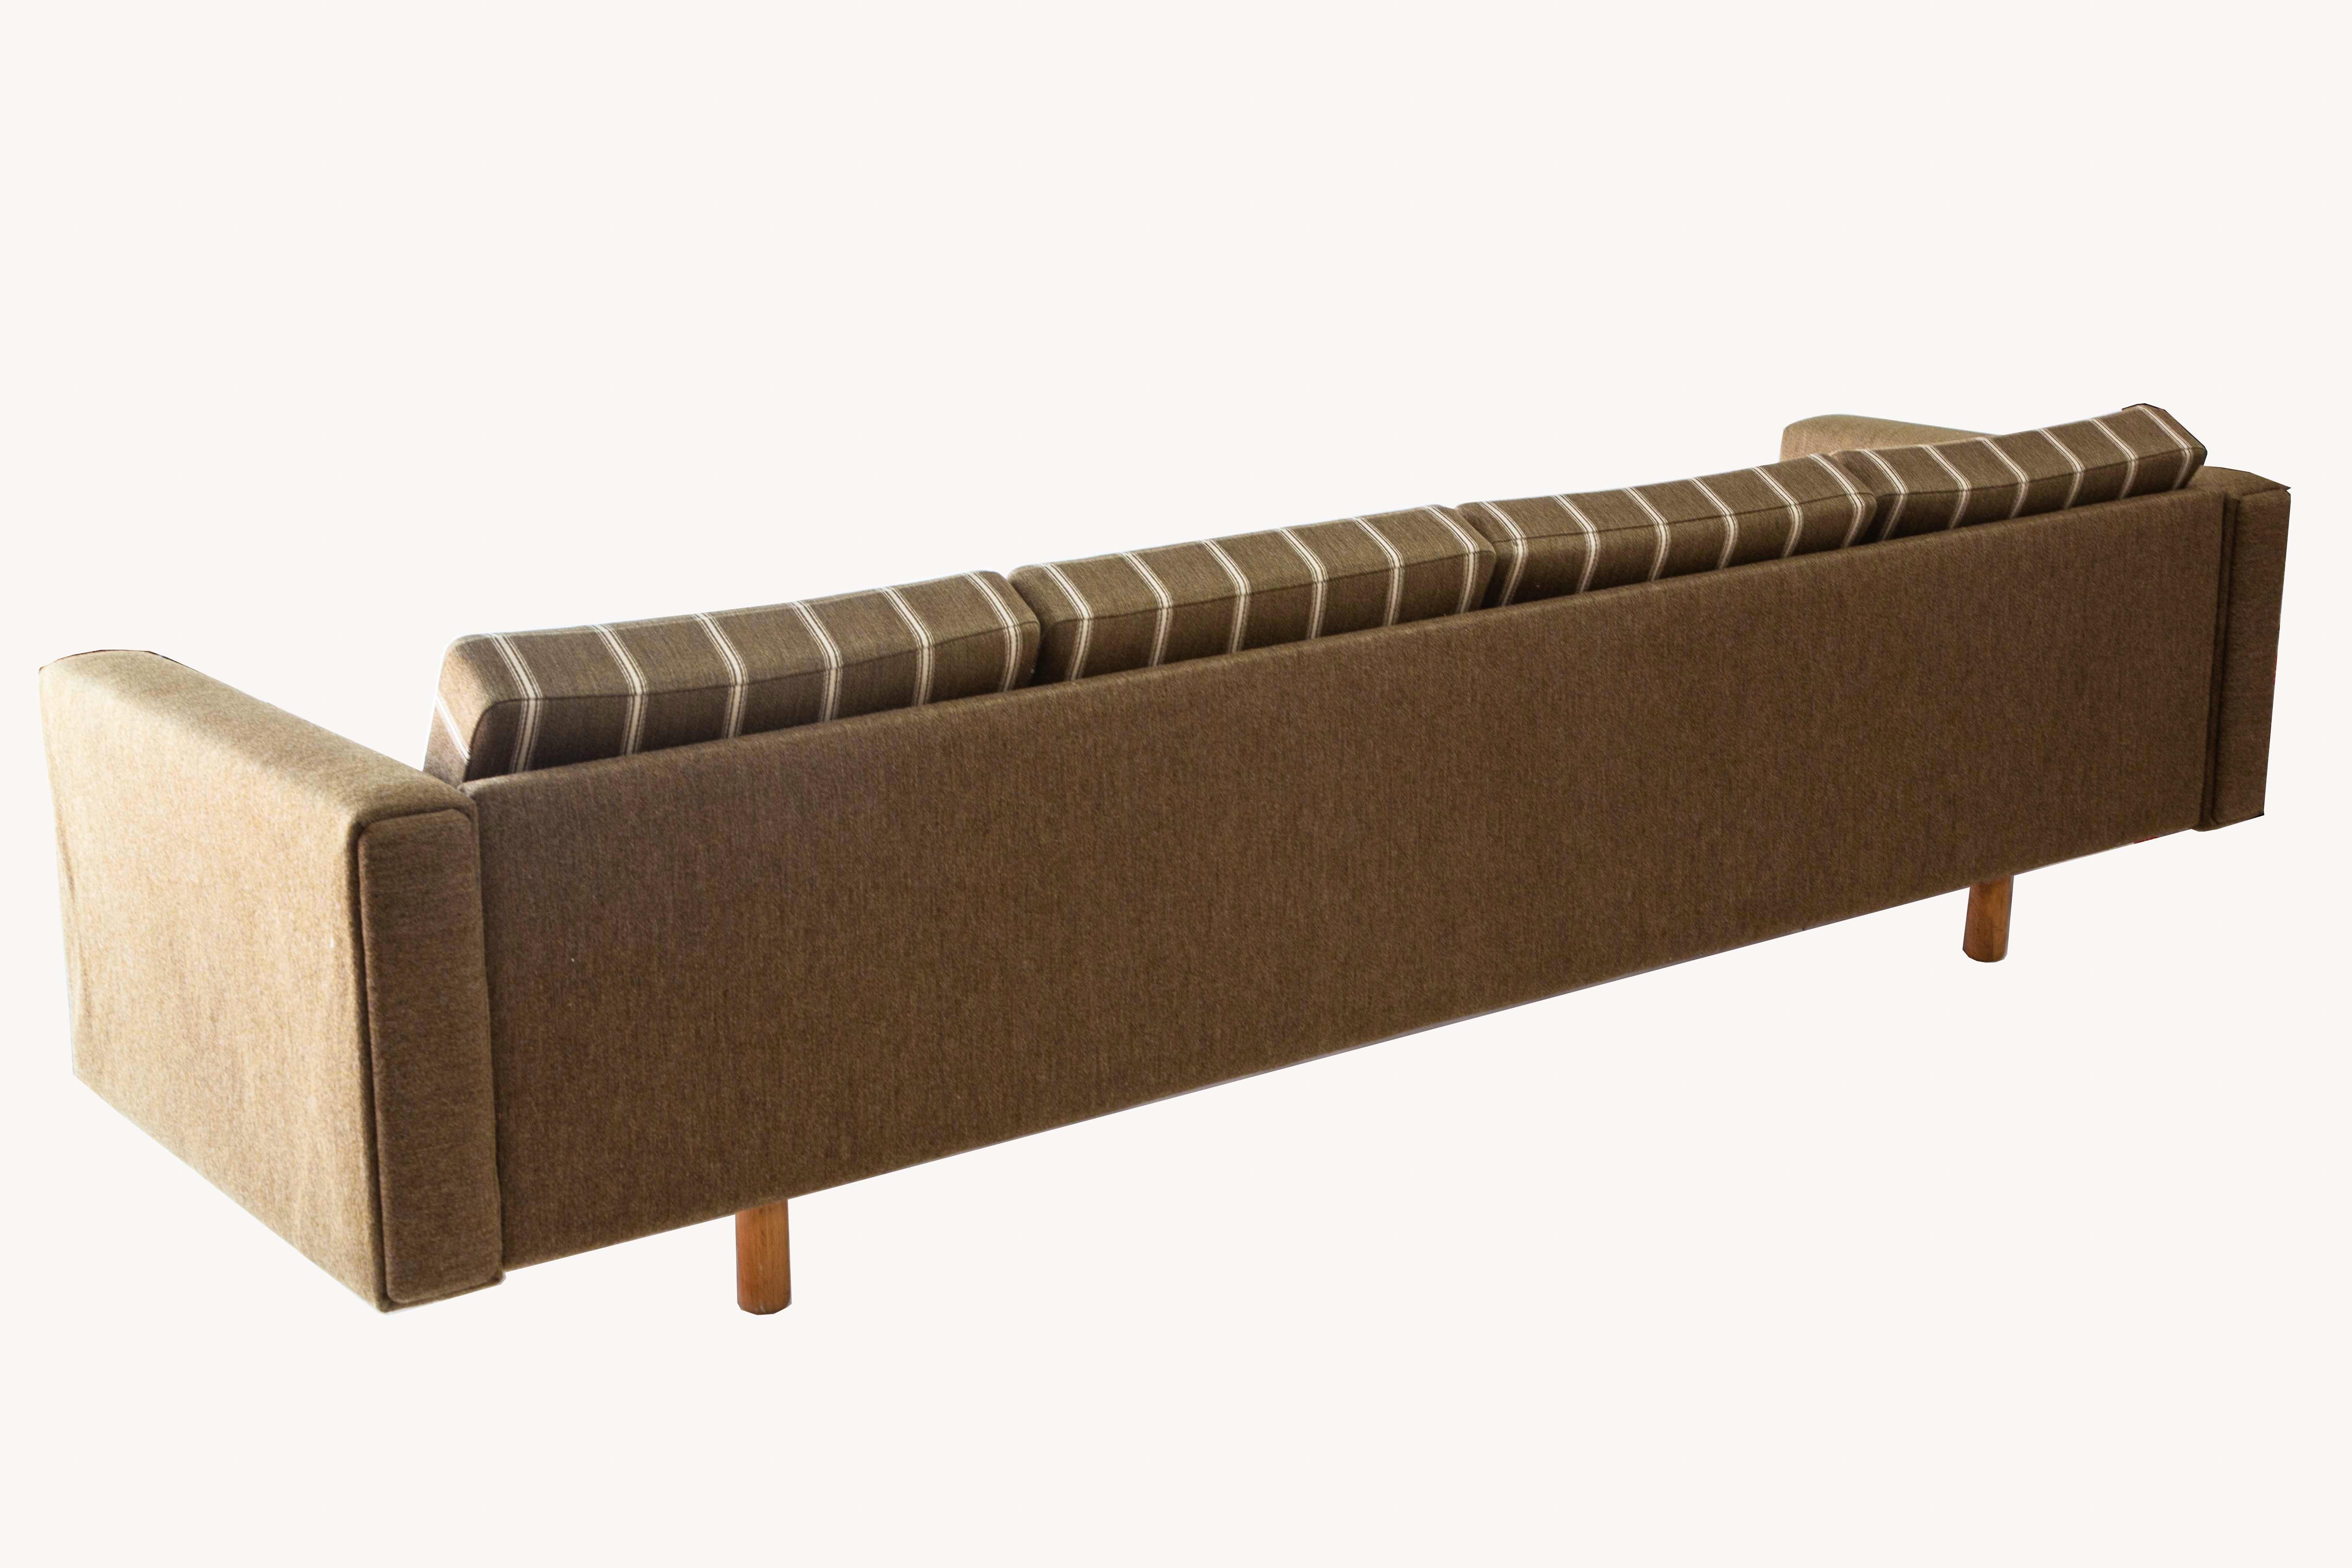 Four-Seat Sofa by Wegner for GETAMA In Fair Condition For Sale In New York, NY